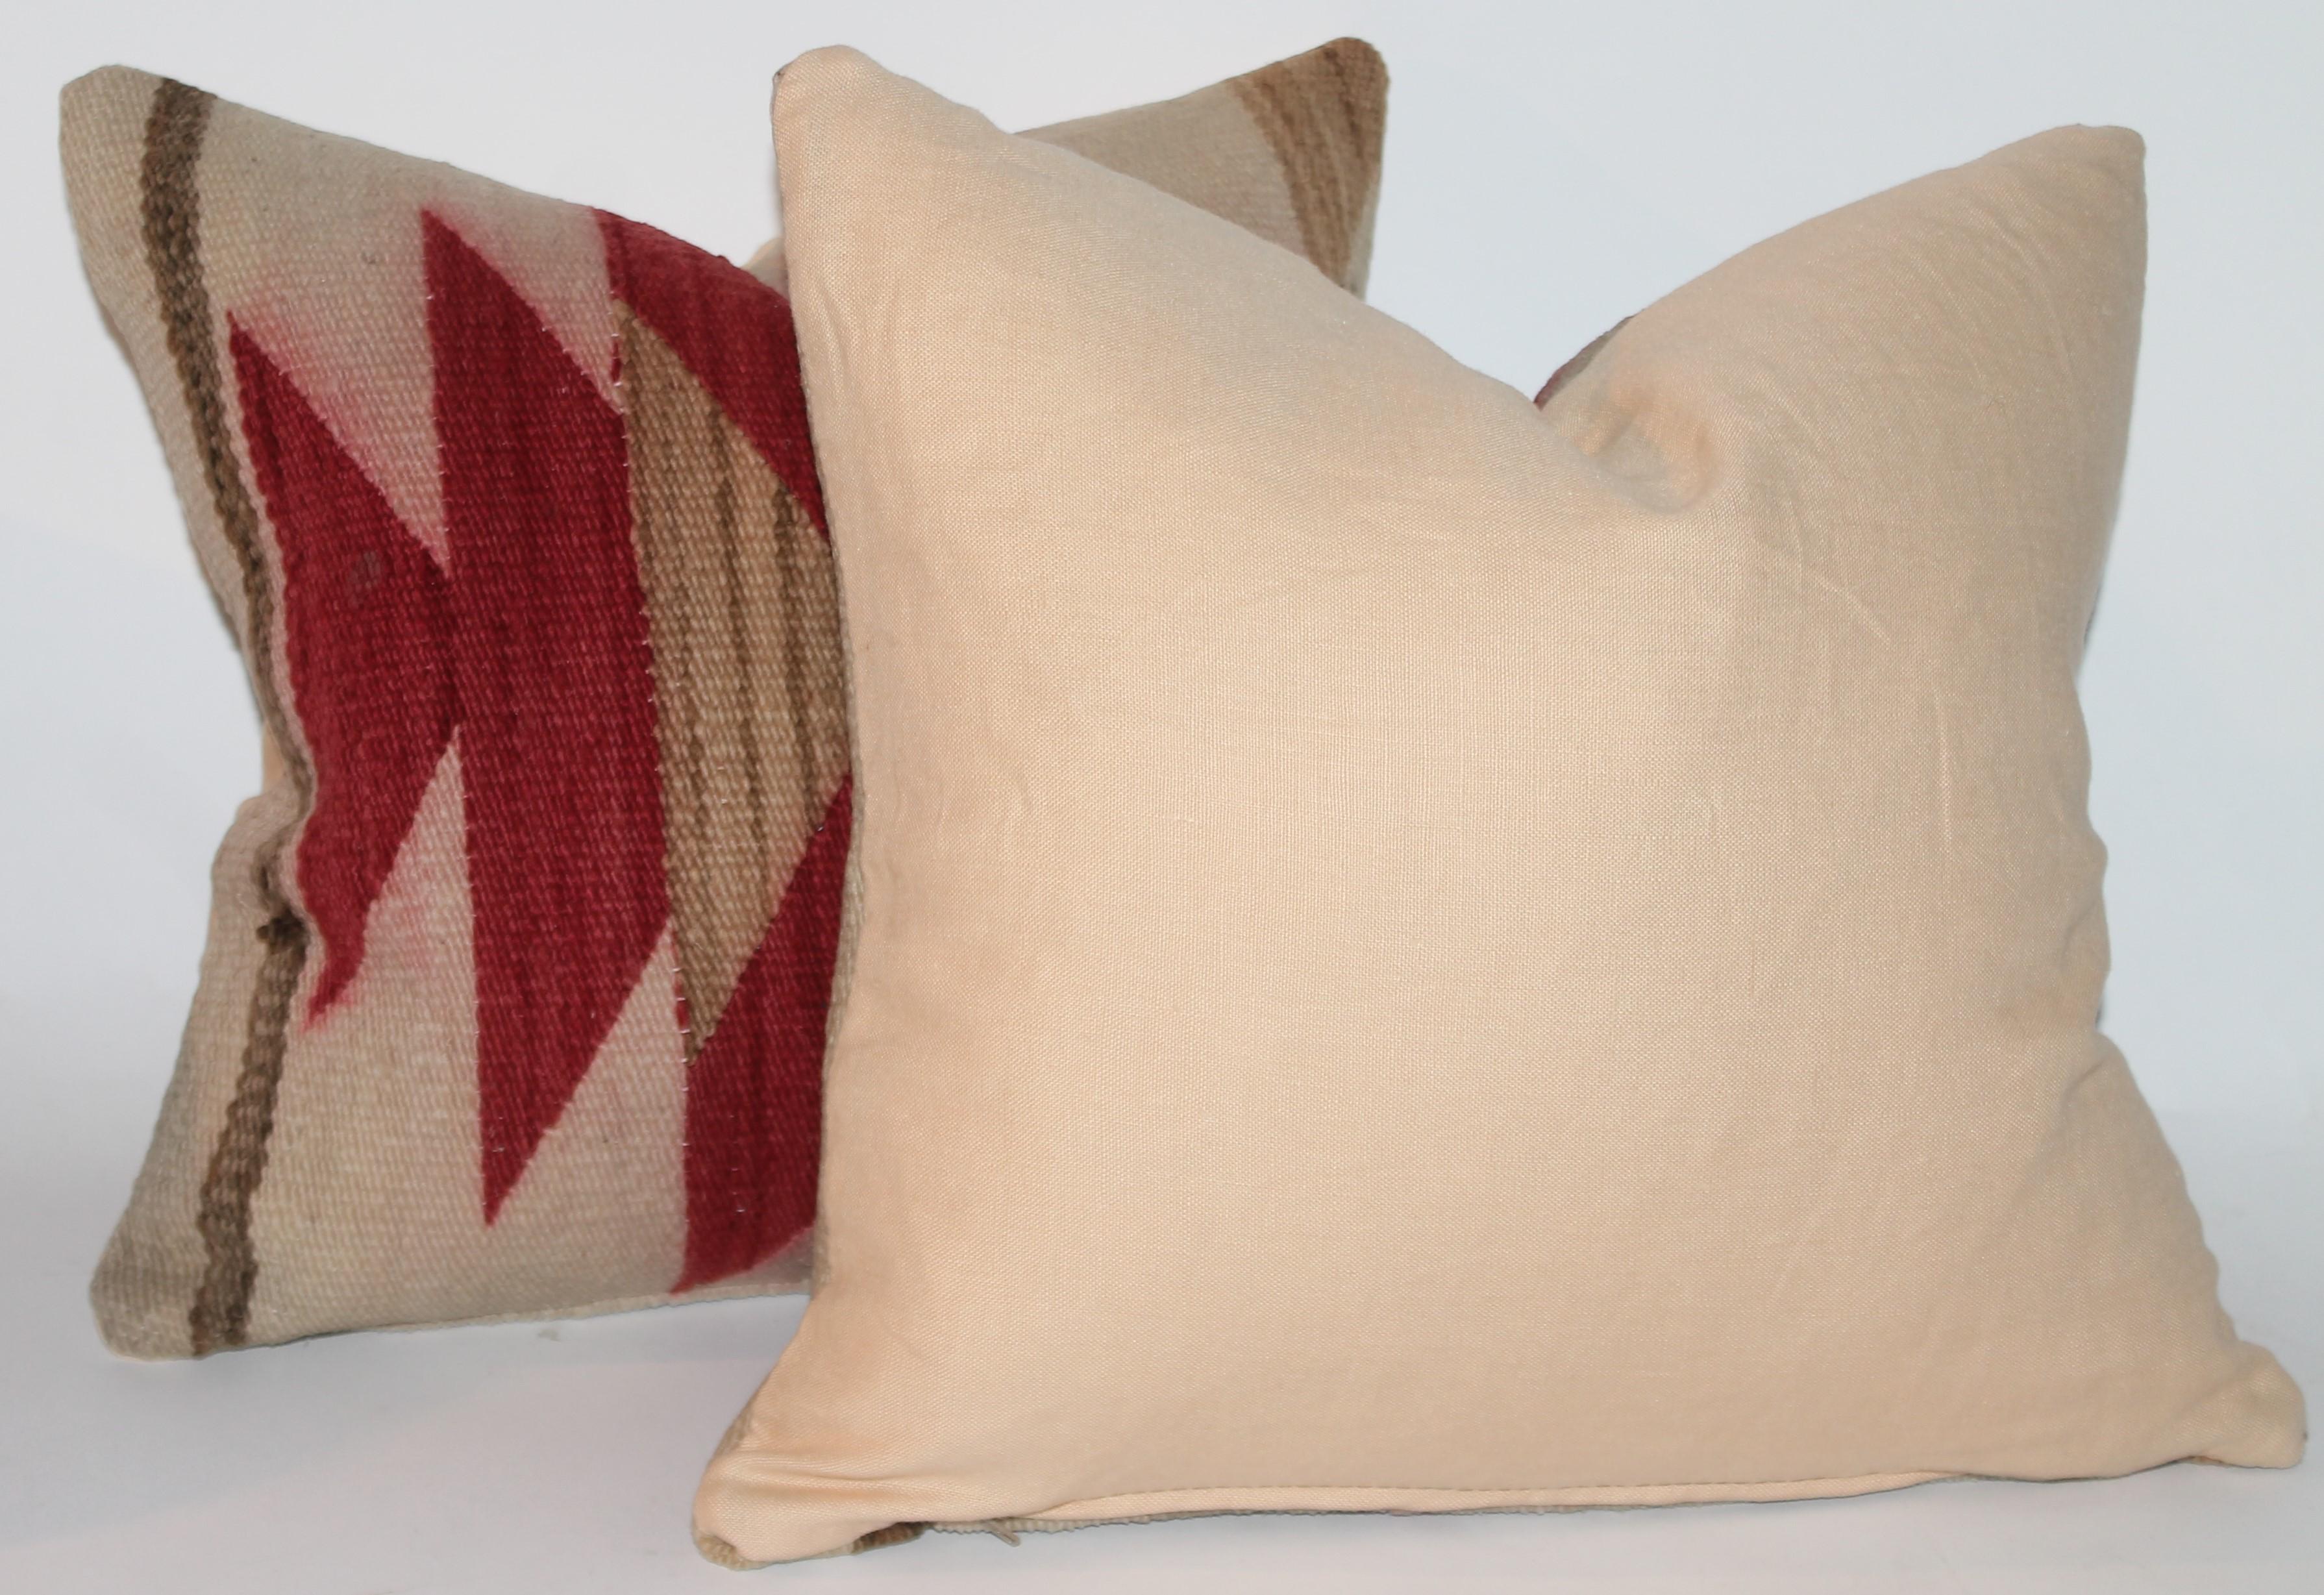 This pair of Navajo Indian weaving pillows are in good condition. The backings are cotton linen and down and feather fill.